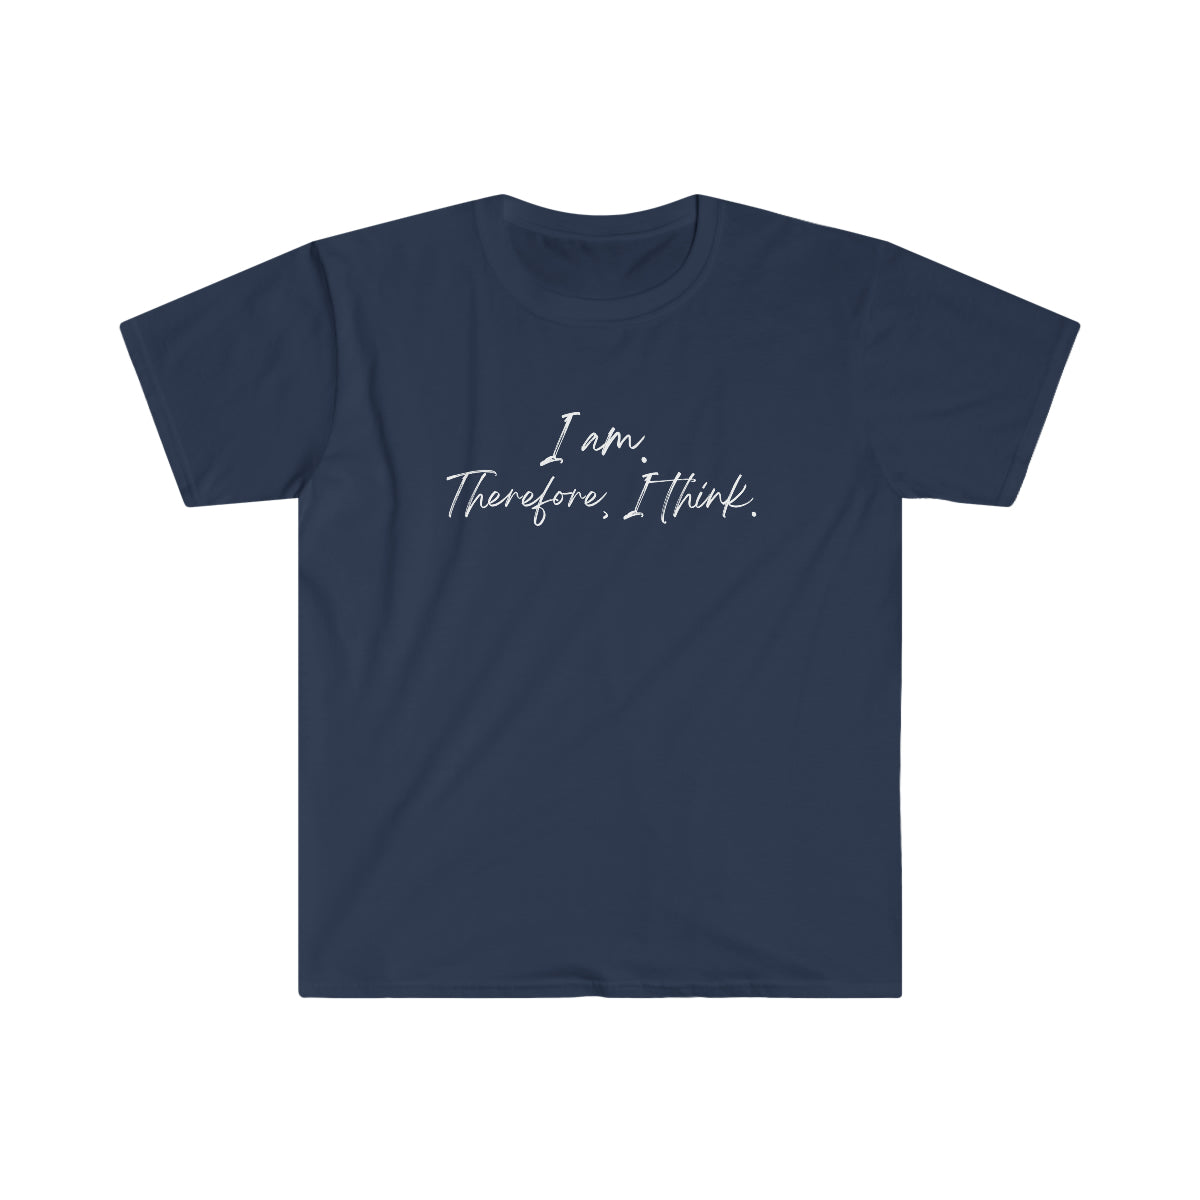 I am. Therefore, I think. Softstyle T-Shirt